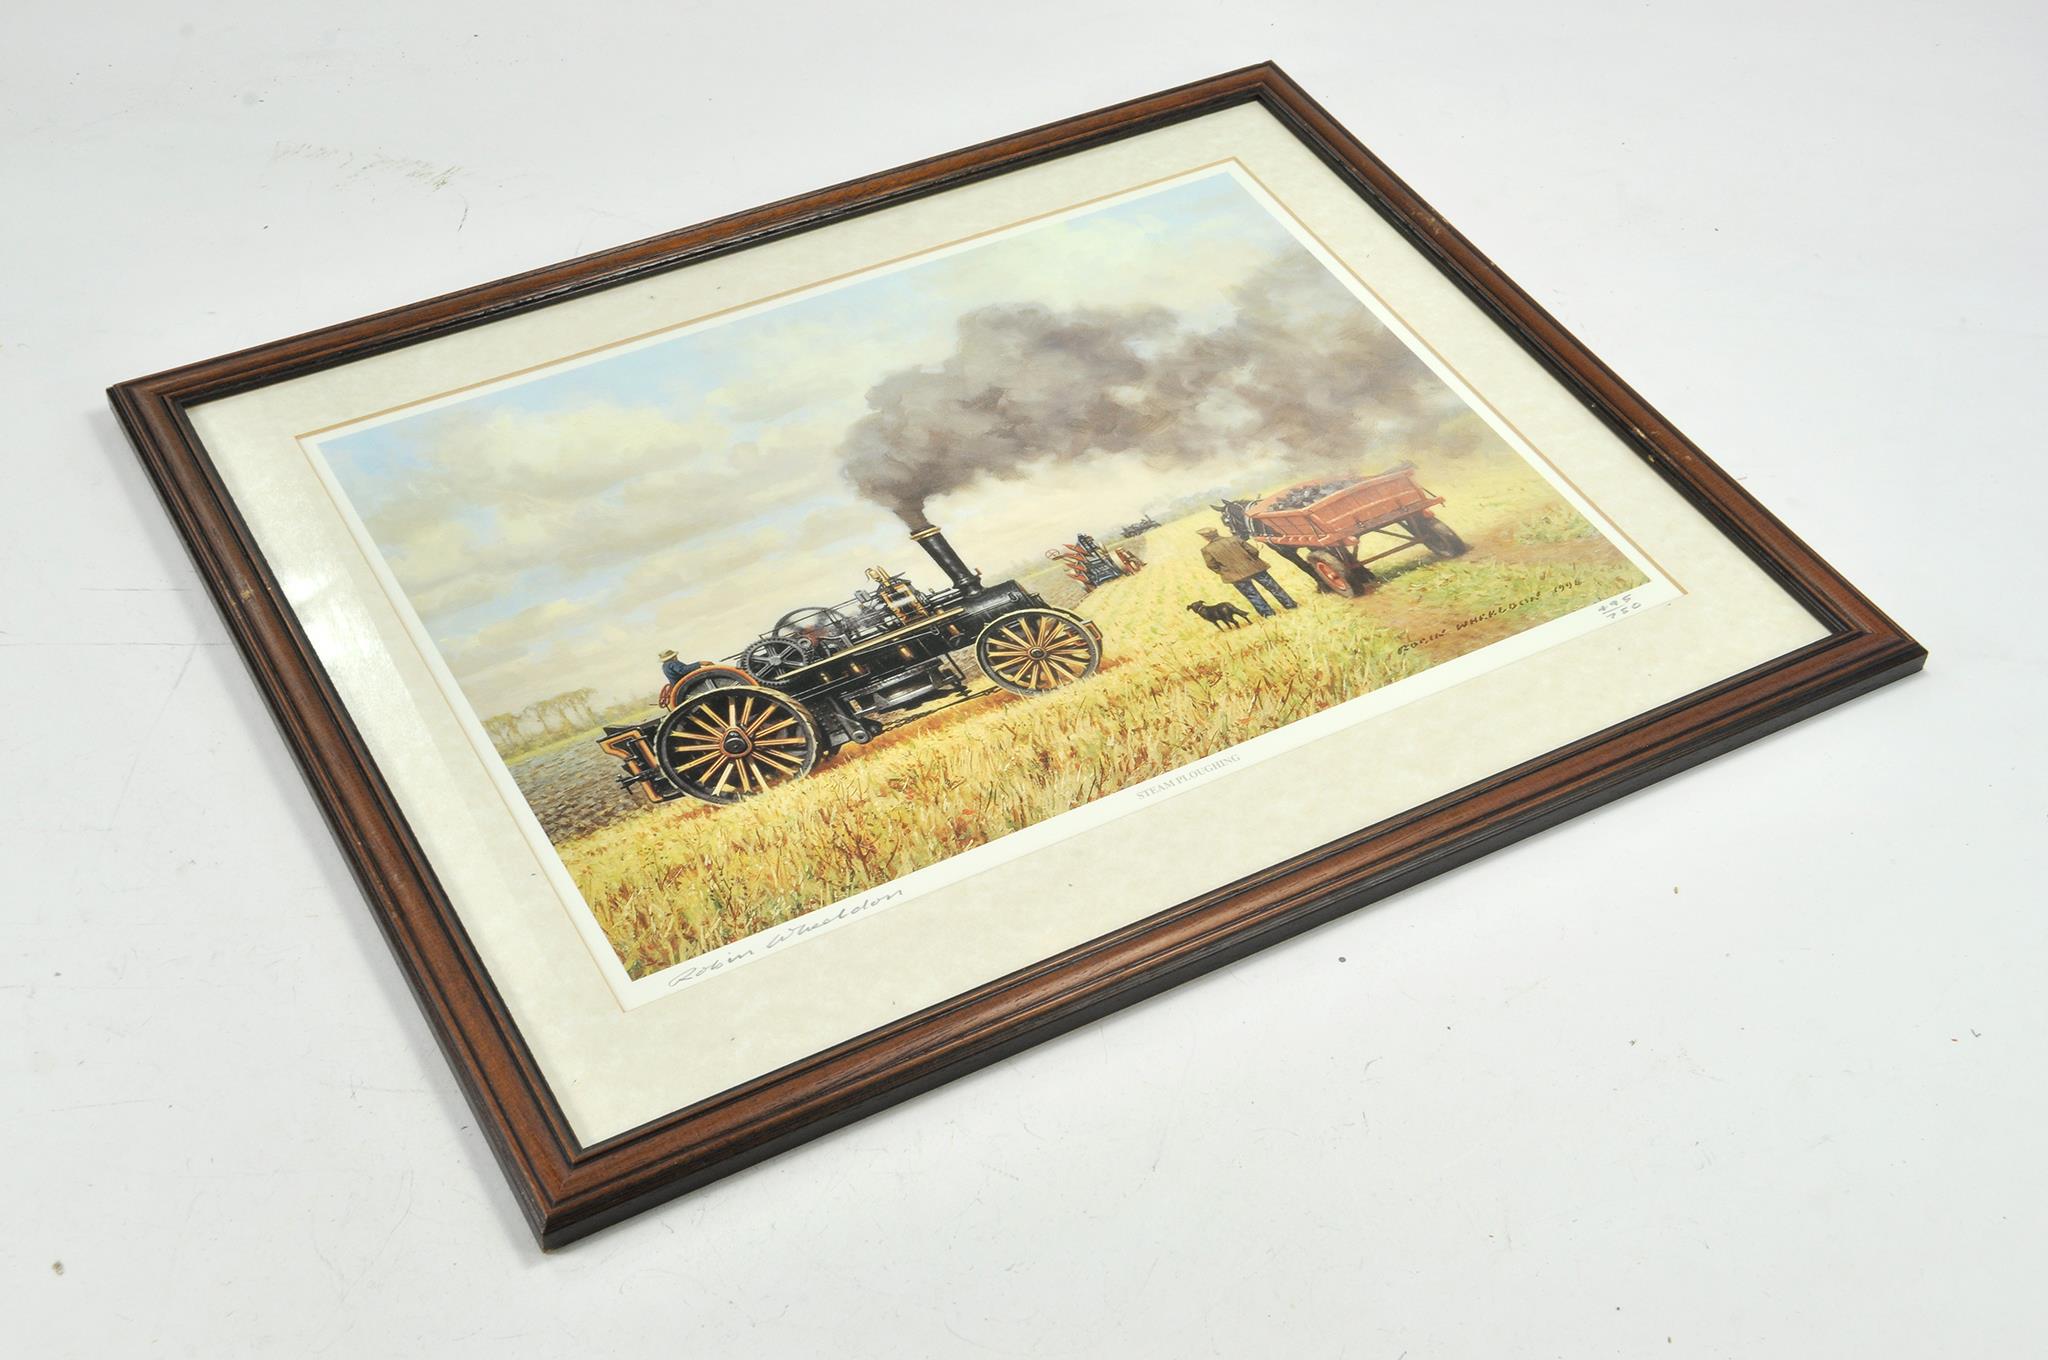 Limited Edition Signed Print by Robin Wheeldon - Framed Farm Scene - Steam Ploughing.